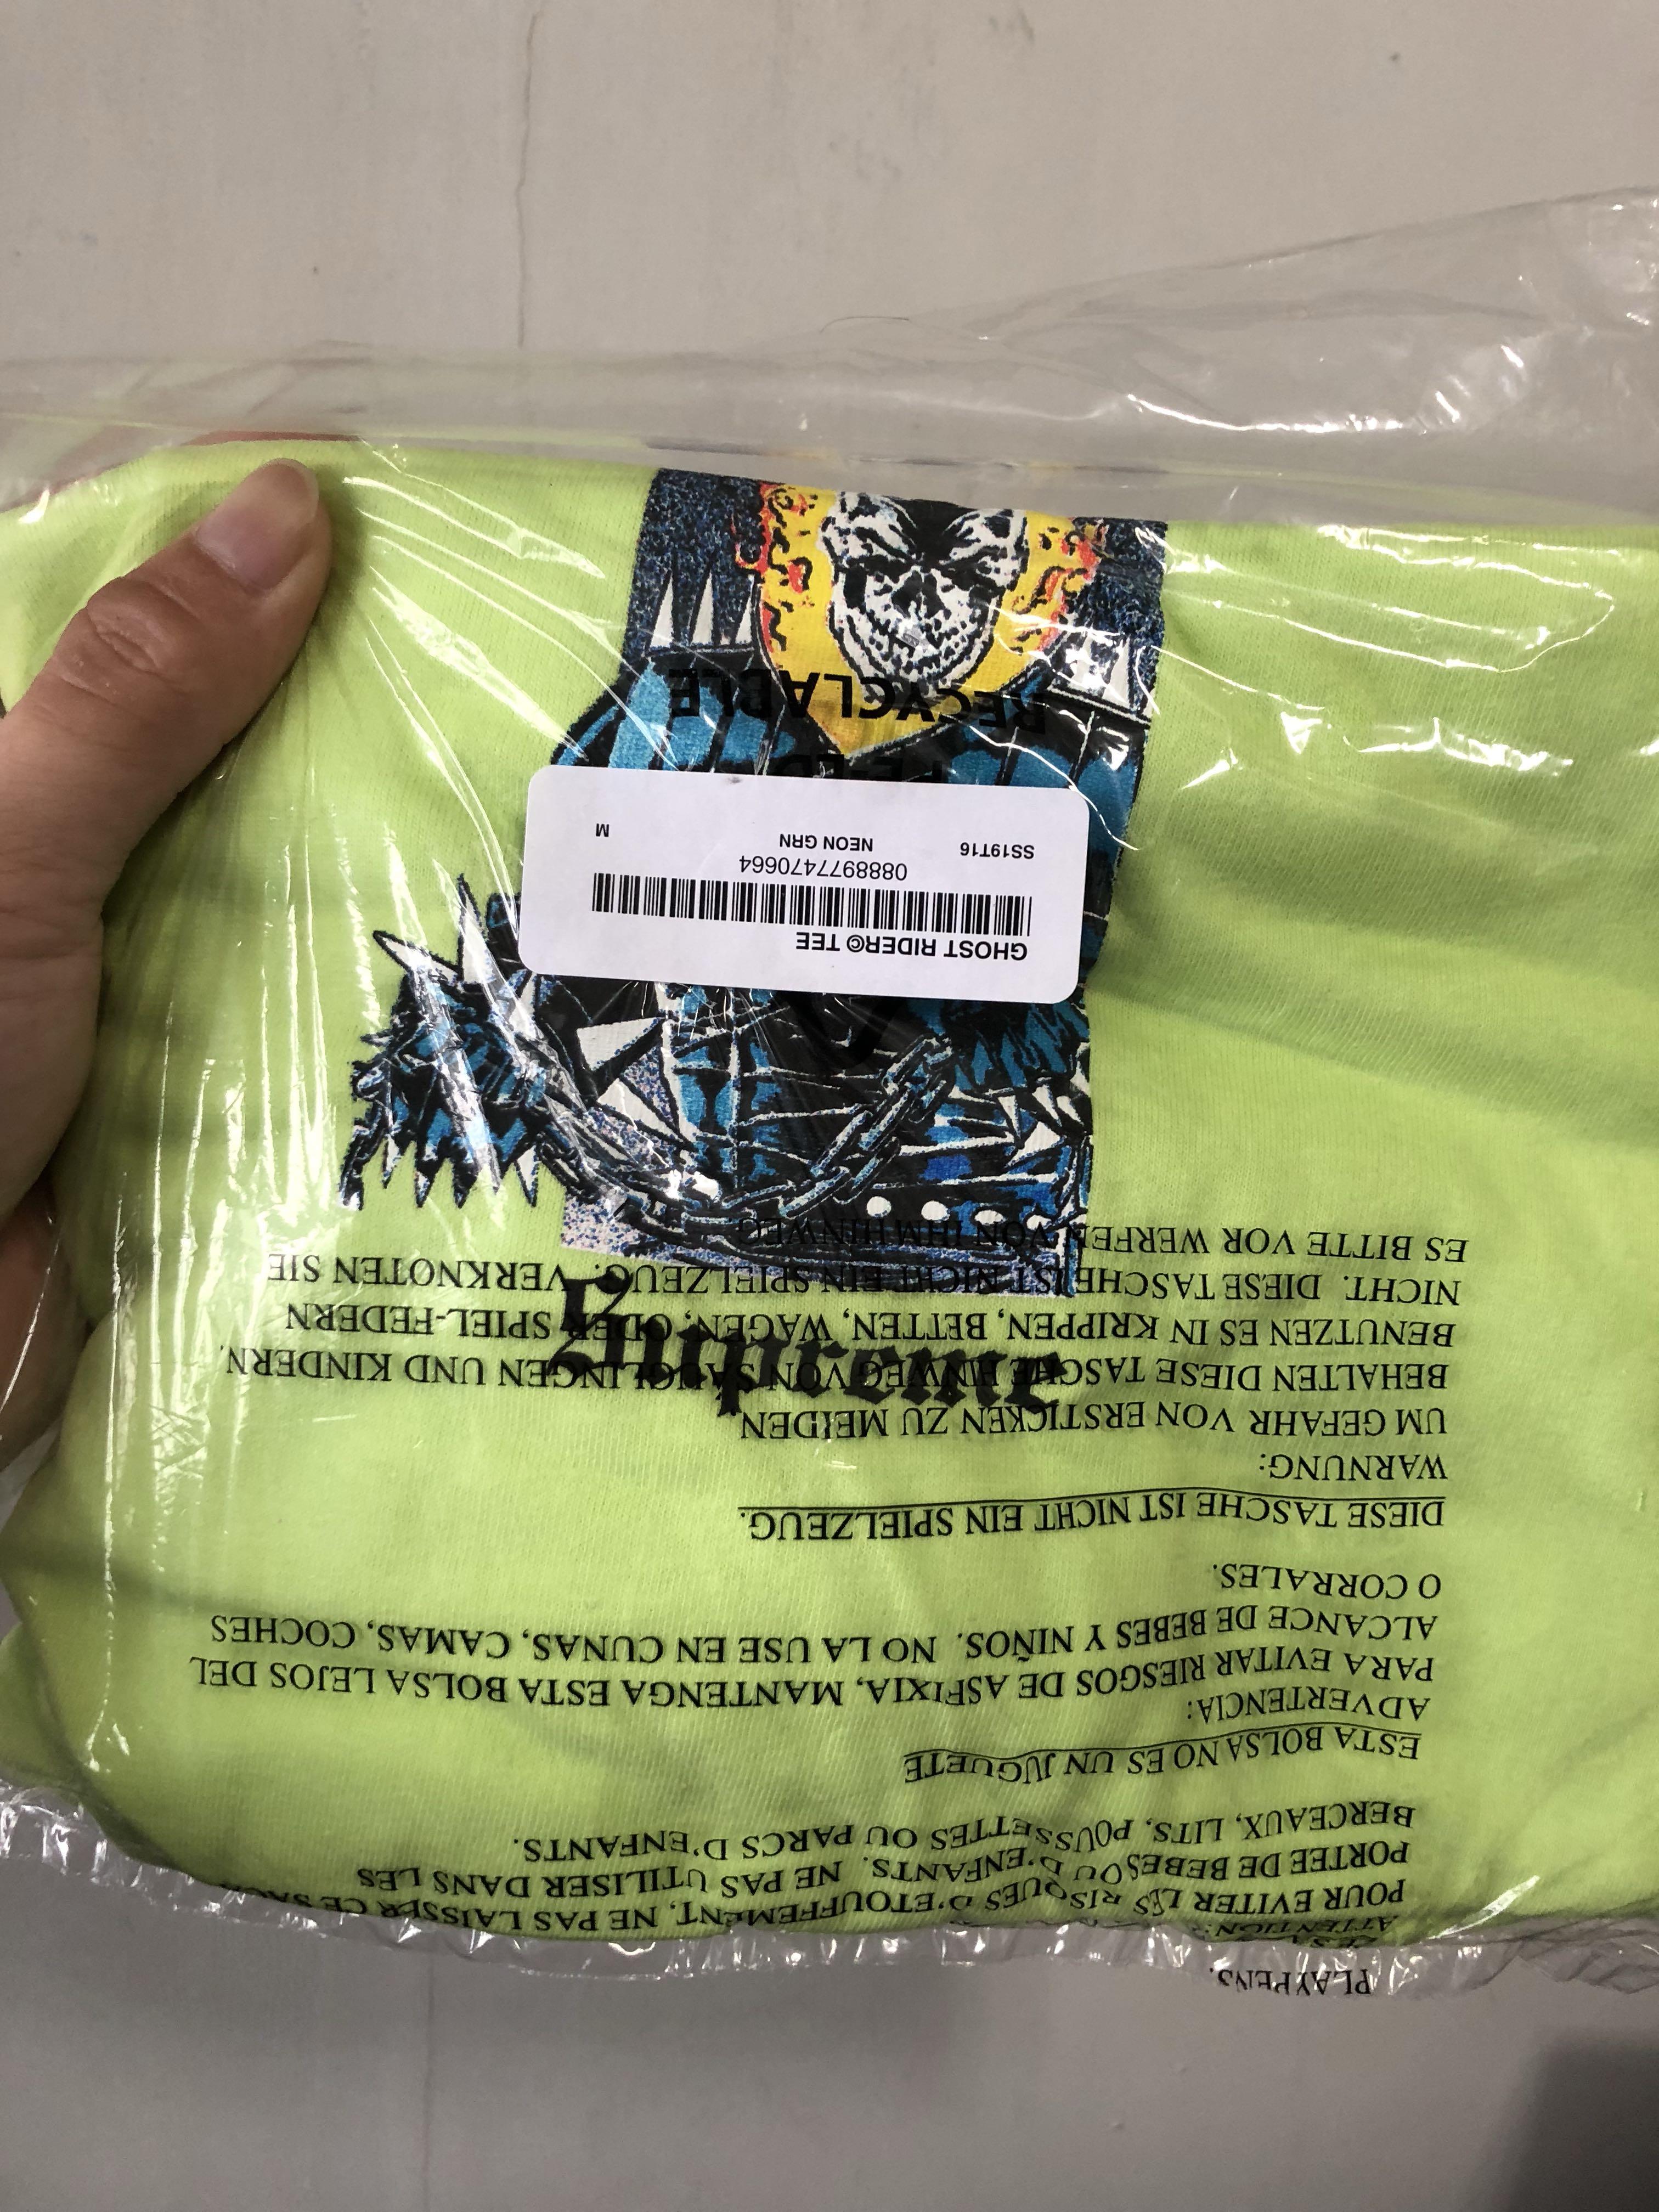 Supreme T Shirts For Men Supreme Ghost Rider Tee T Shirt Ss19 Ss19t16 Brand New Clothing Shoes Accessories Ssnslk Com